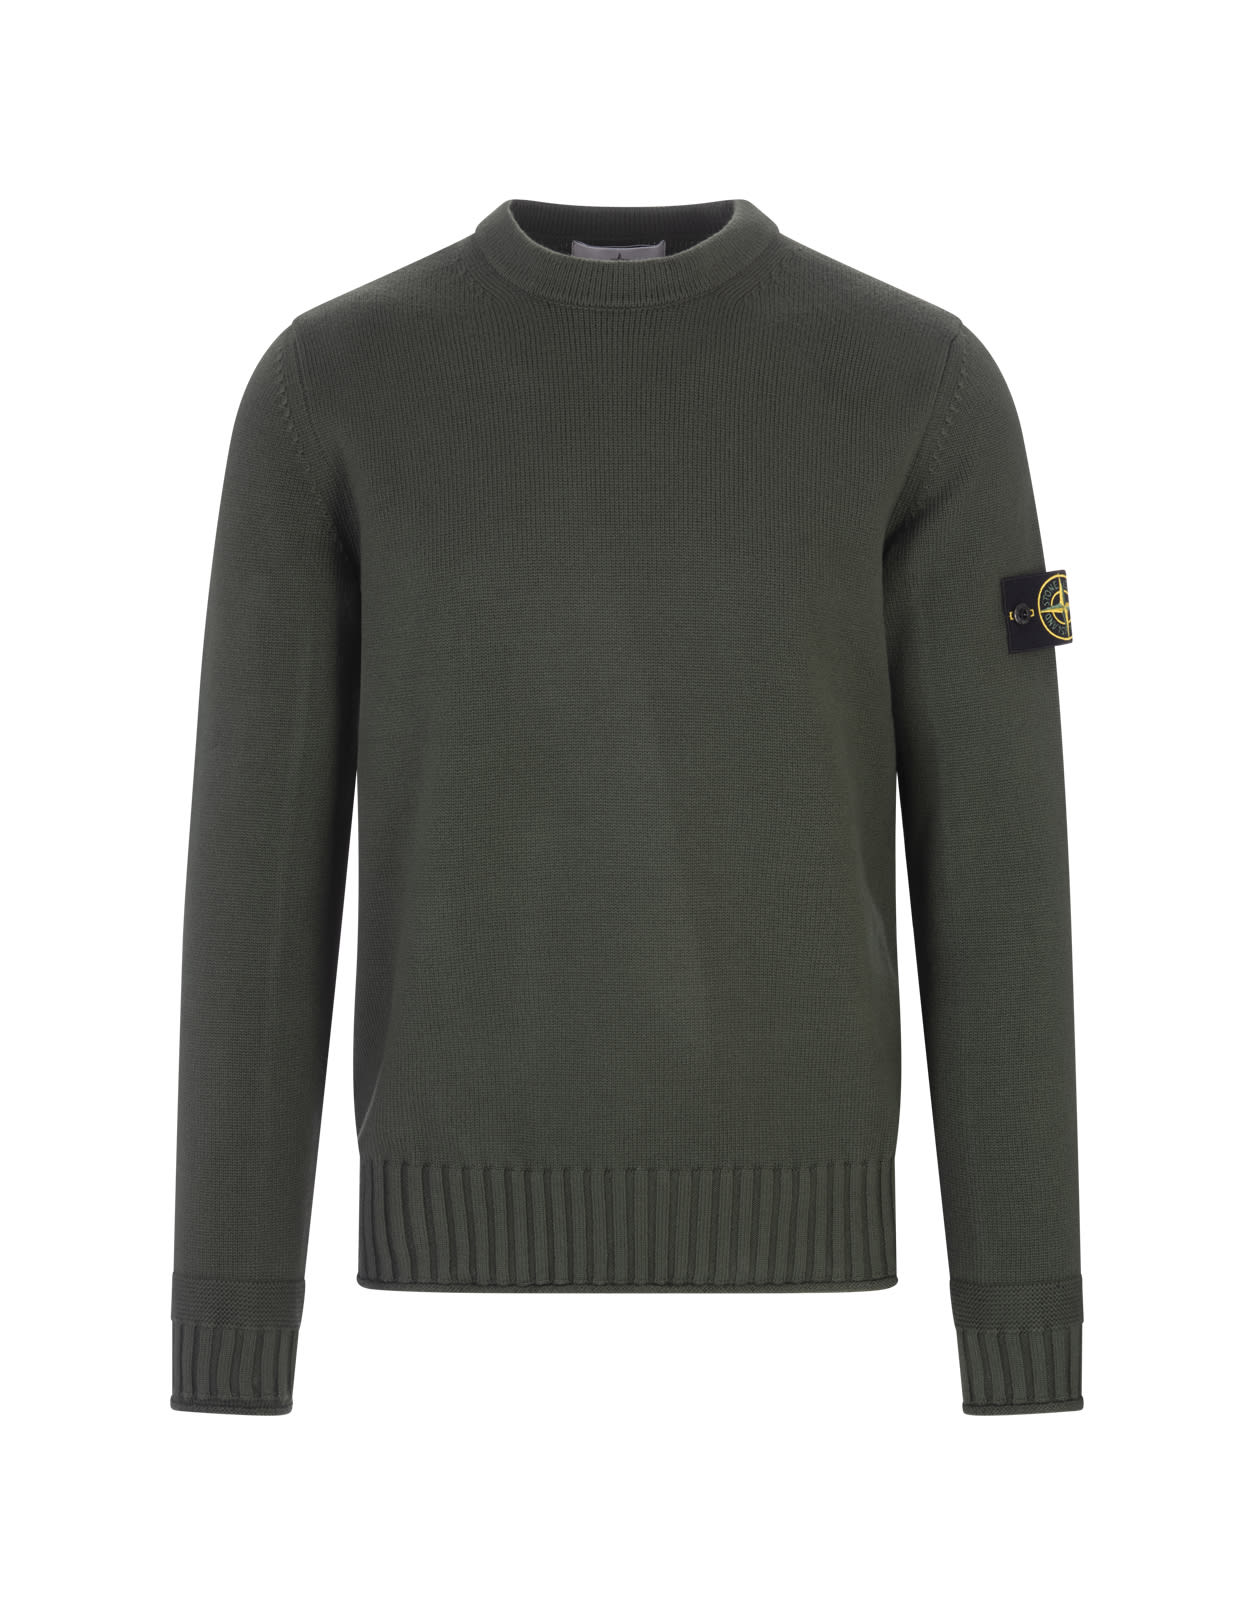 Stone Island Man Military Green Shaved Sweater